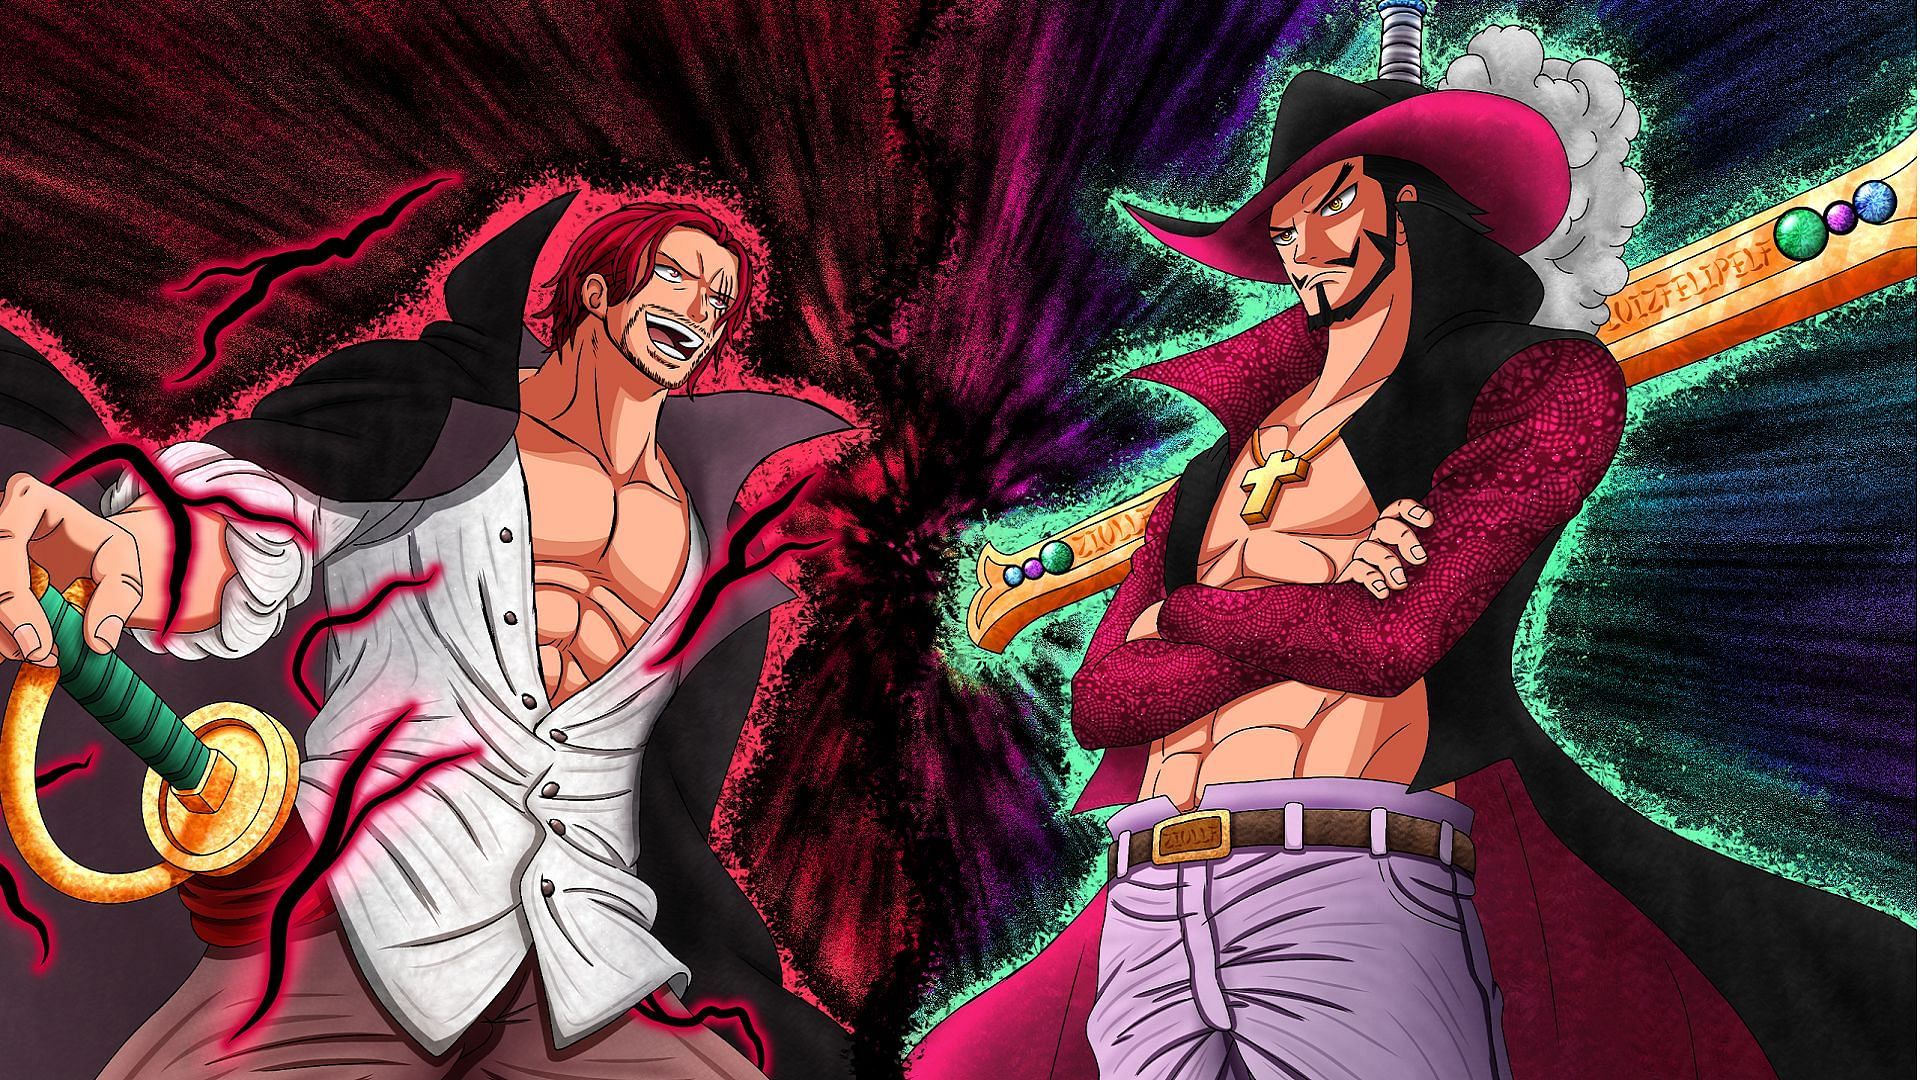 Is Mihawk the current Strongest Man in the World?